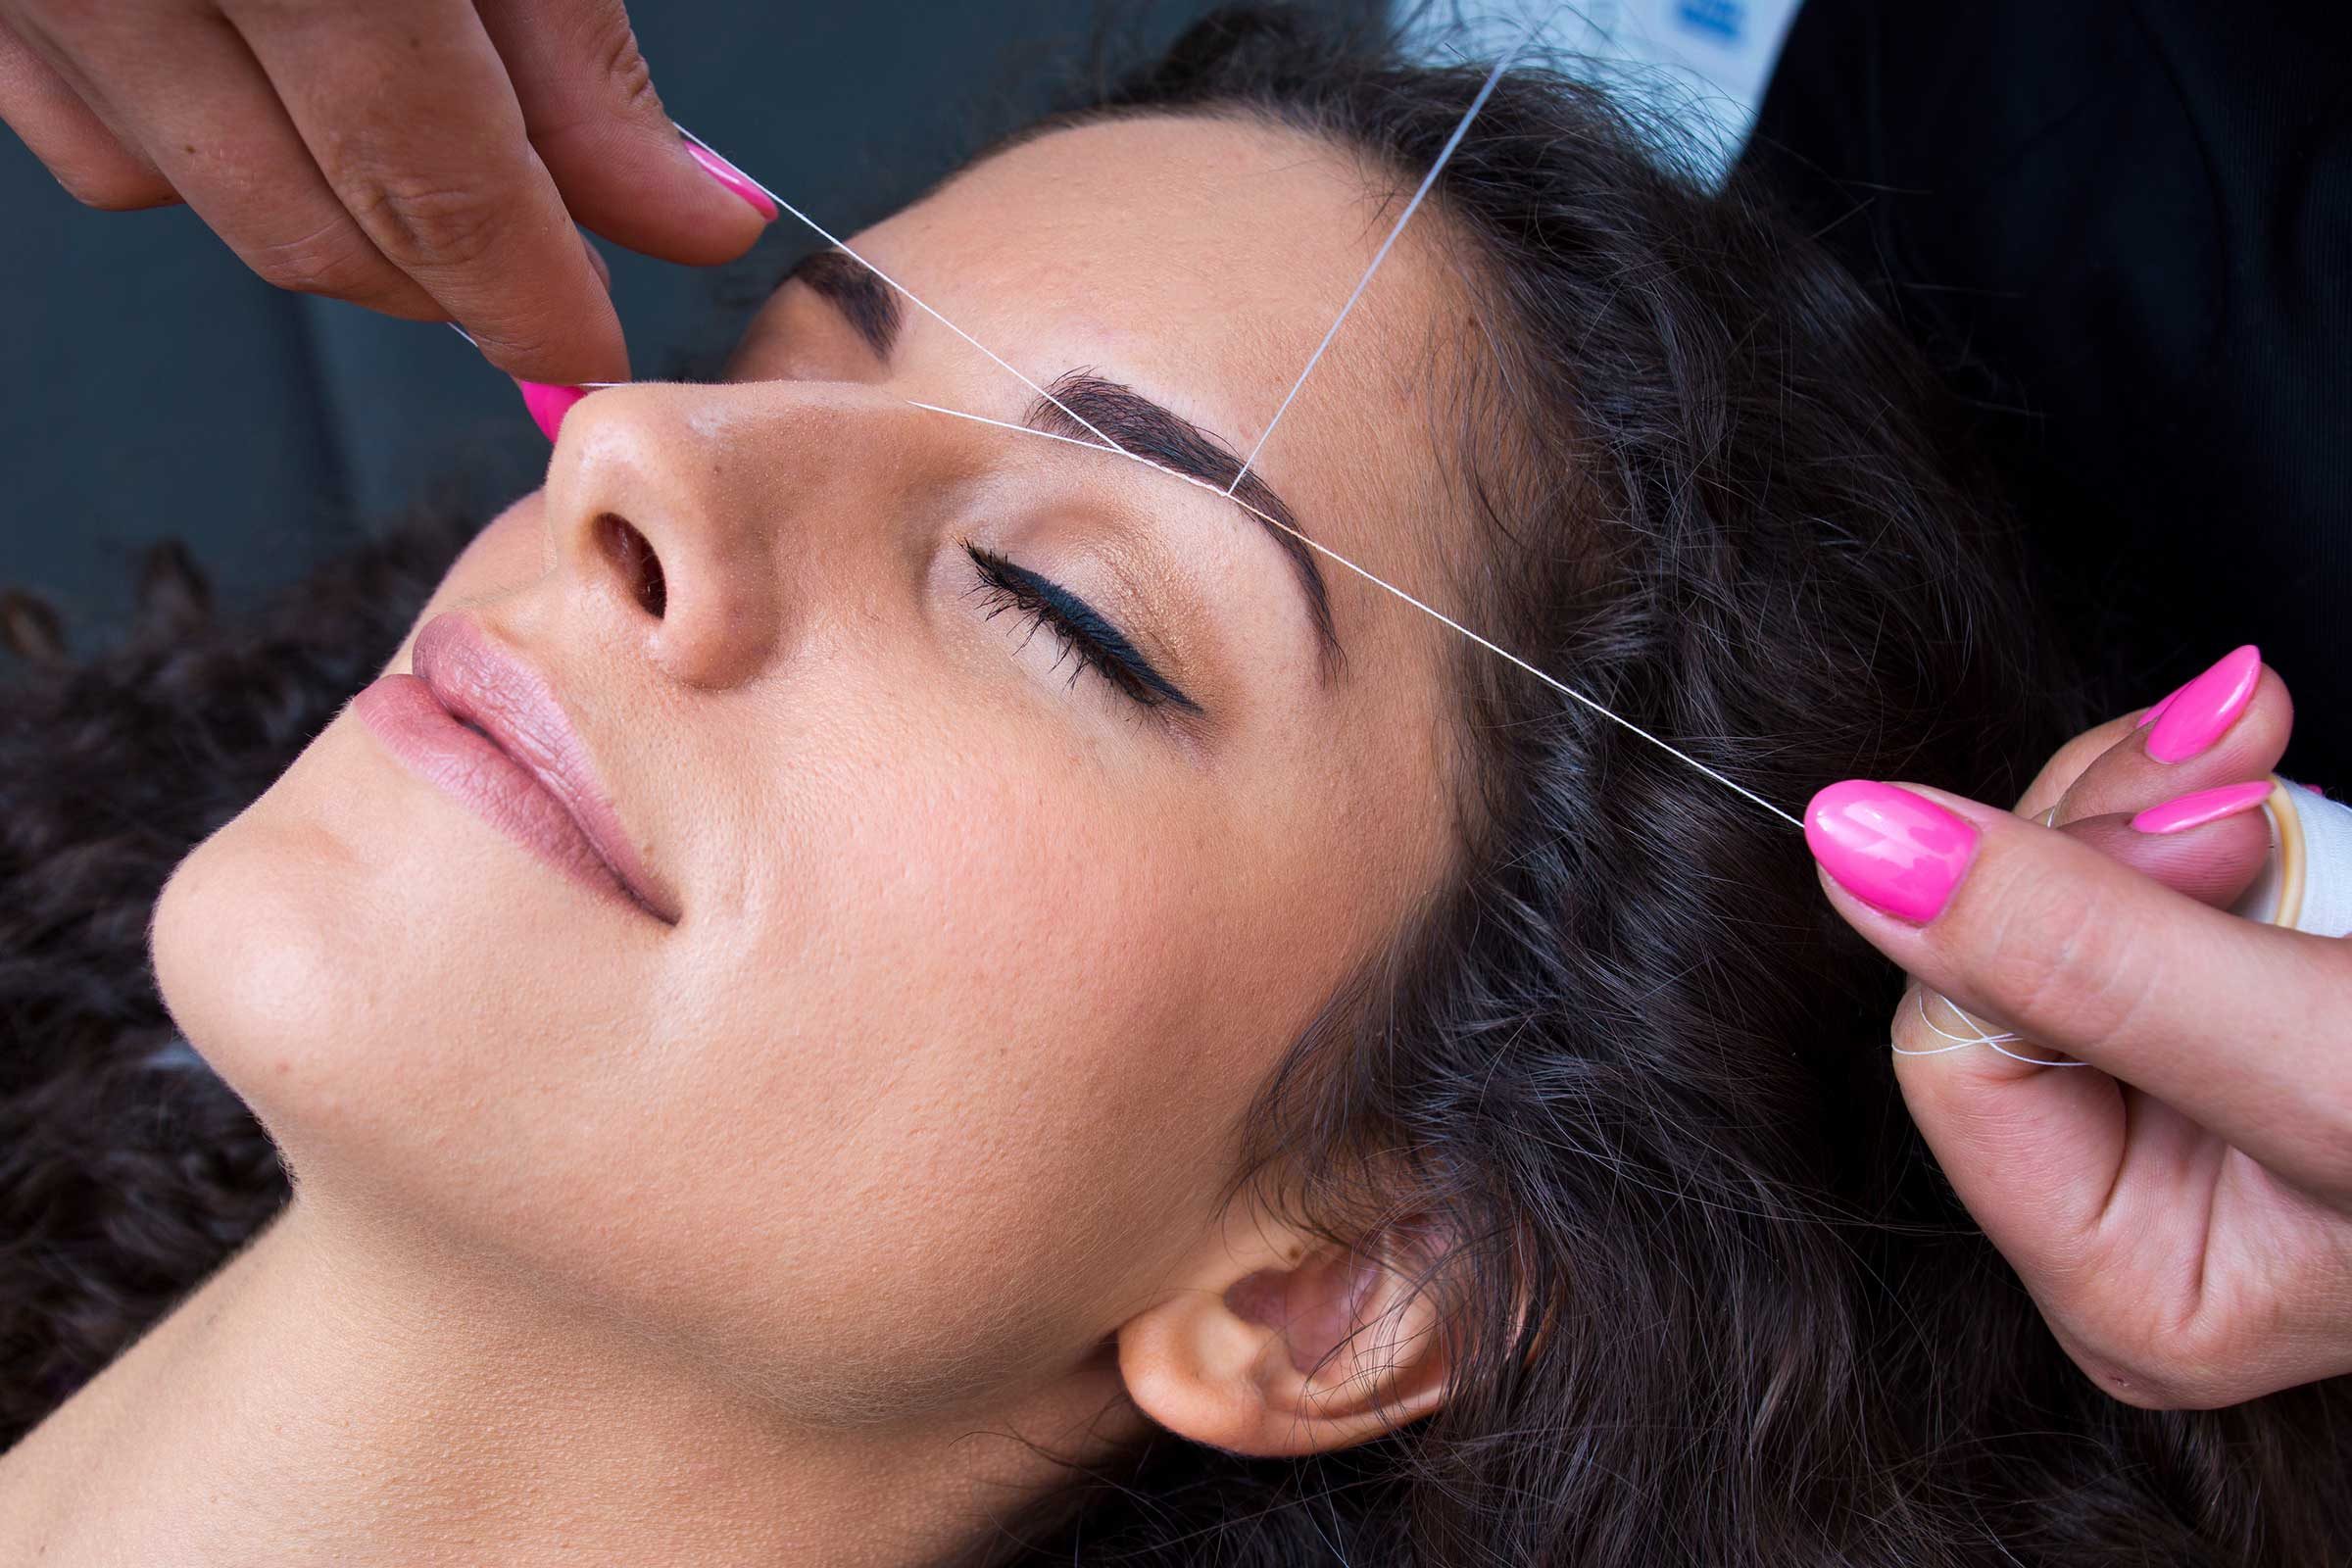 How to Make Your Skin Ready for Eyebrow Threading?